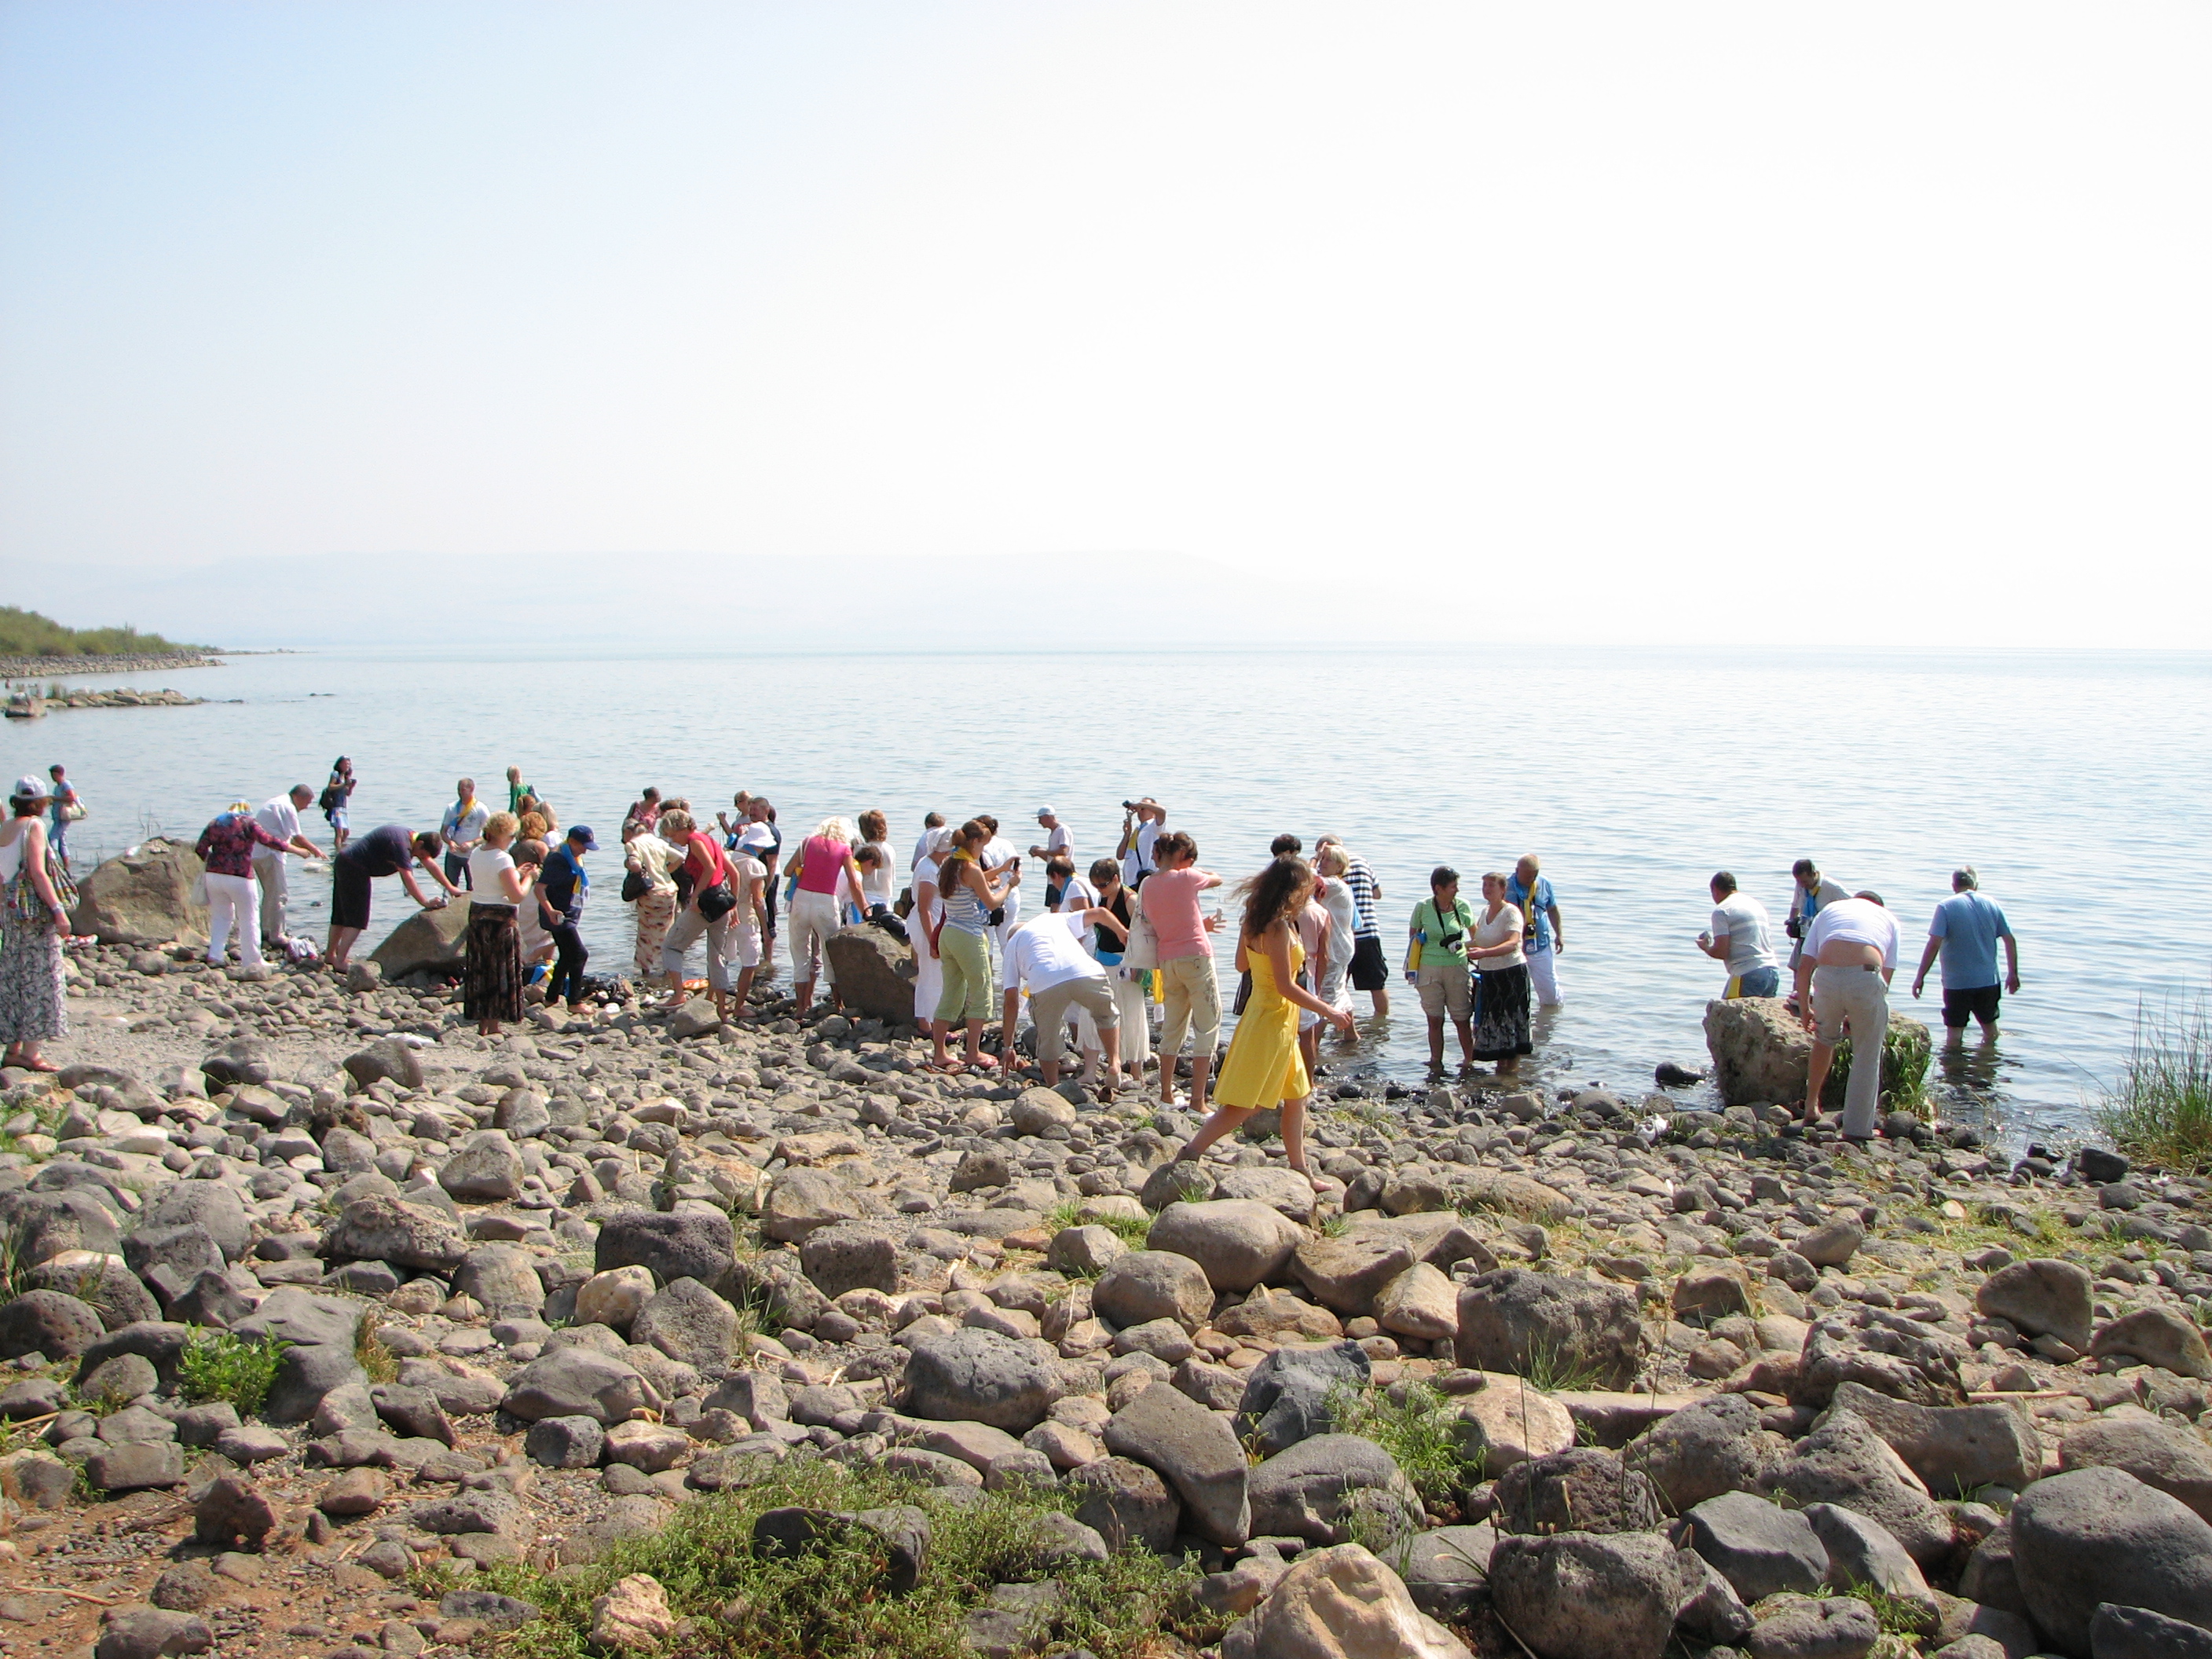 Cristian pilgrims at the Galilean Sea (Lake) in Israel (where Jesus Christ preached), picture 17